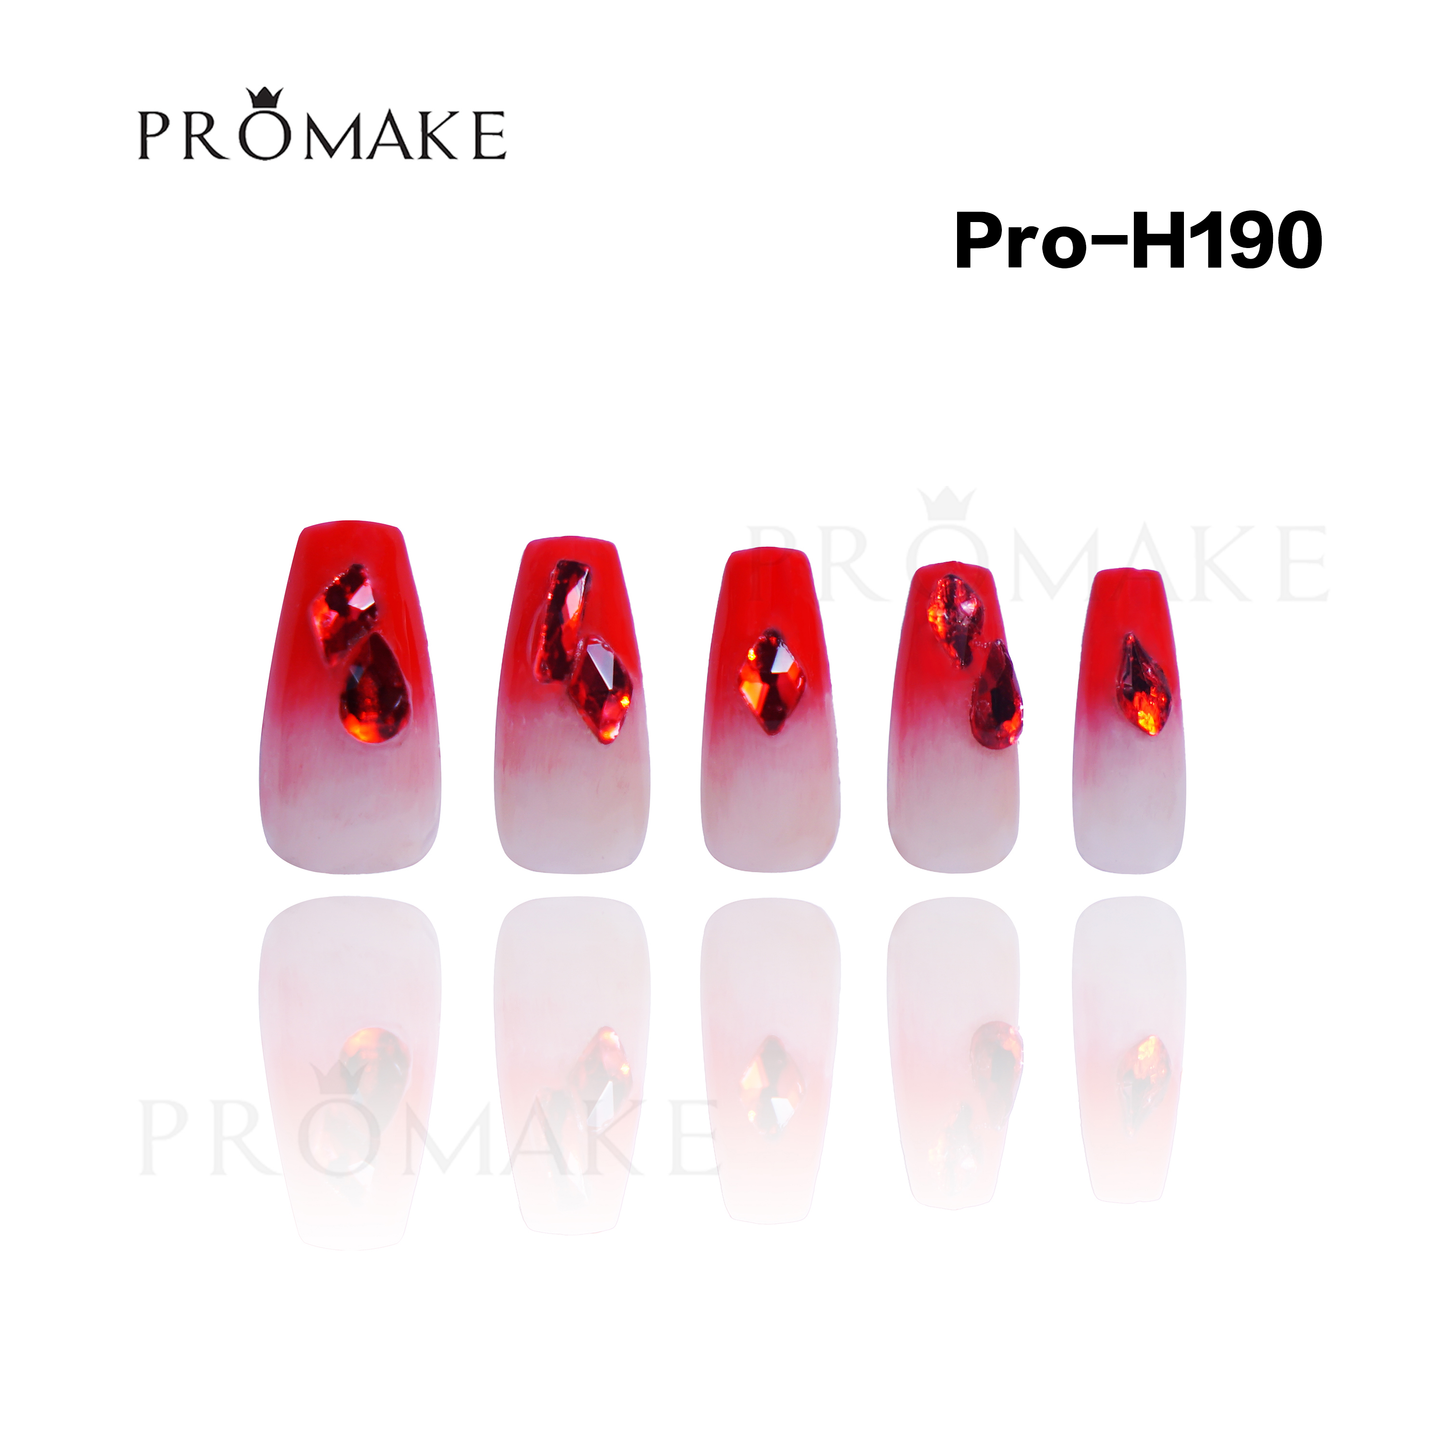 Promake Luxury French Tips Press on Nails Medium Length 25-28mm two part